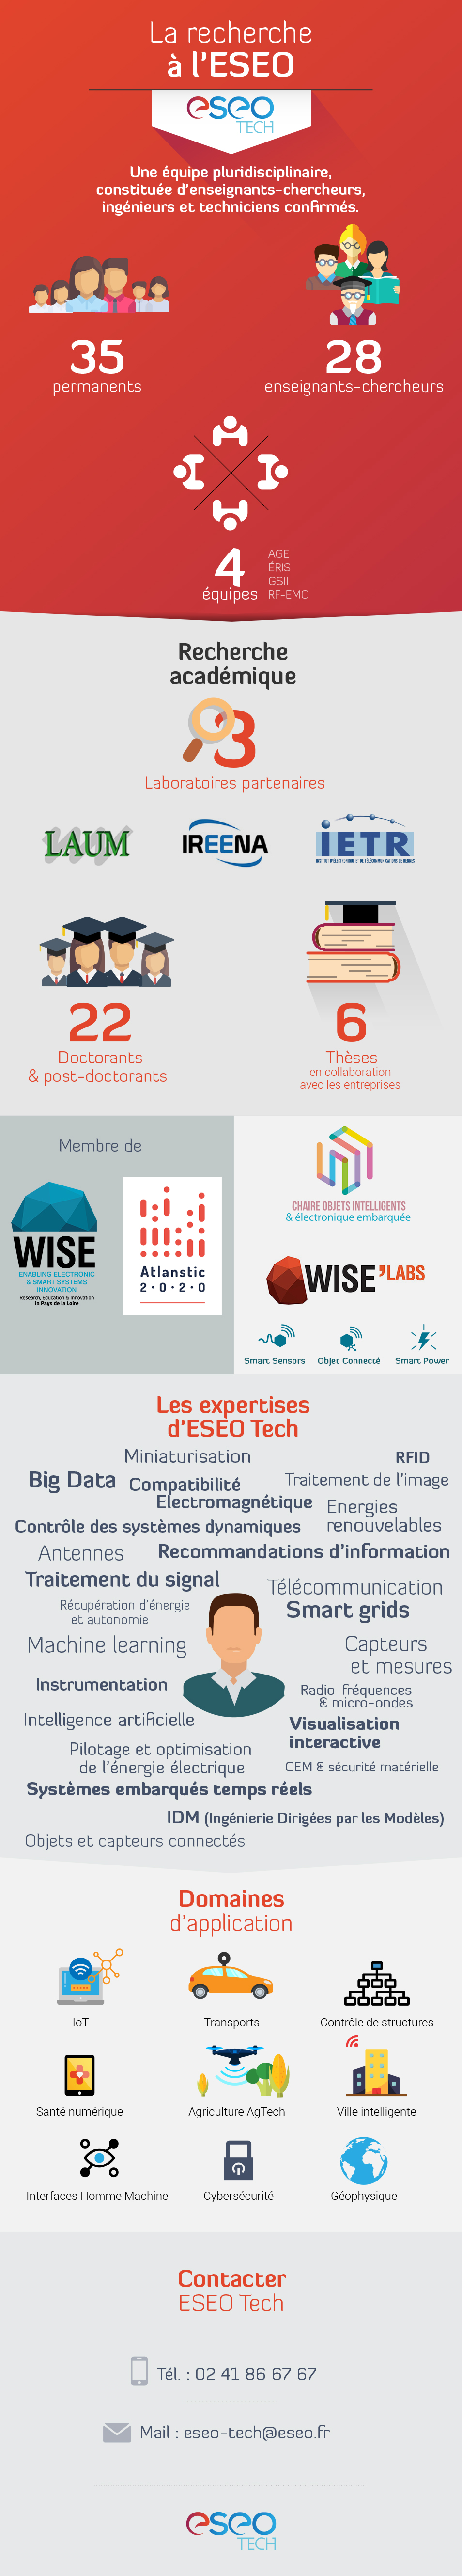 infographie-eseo-tech